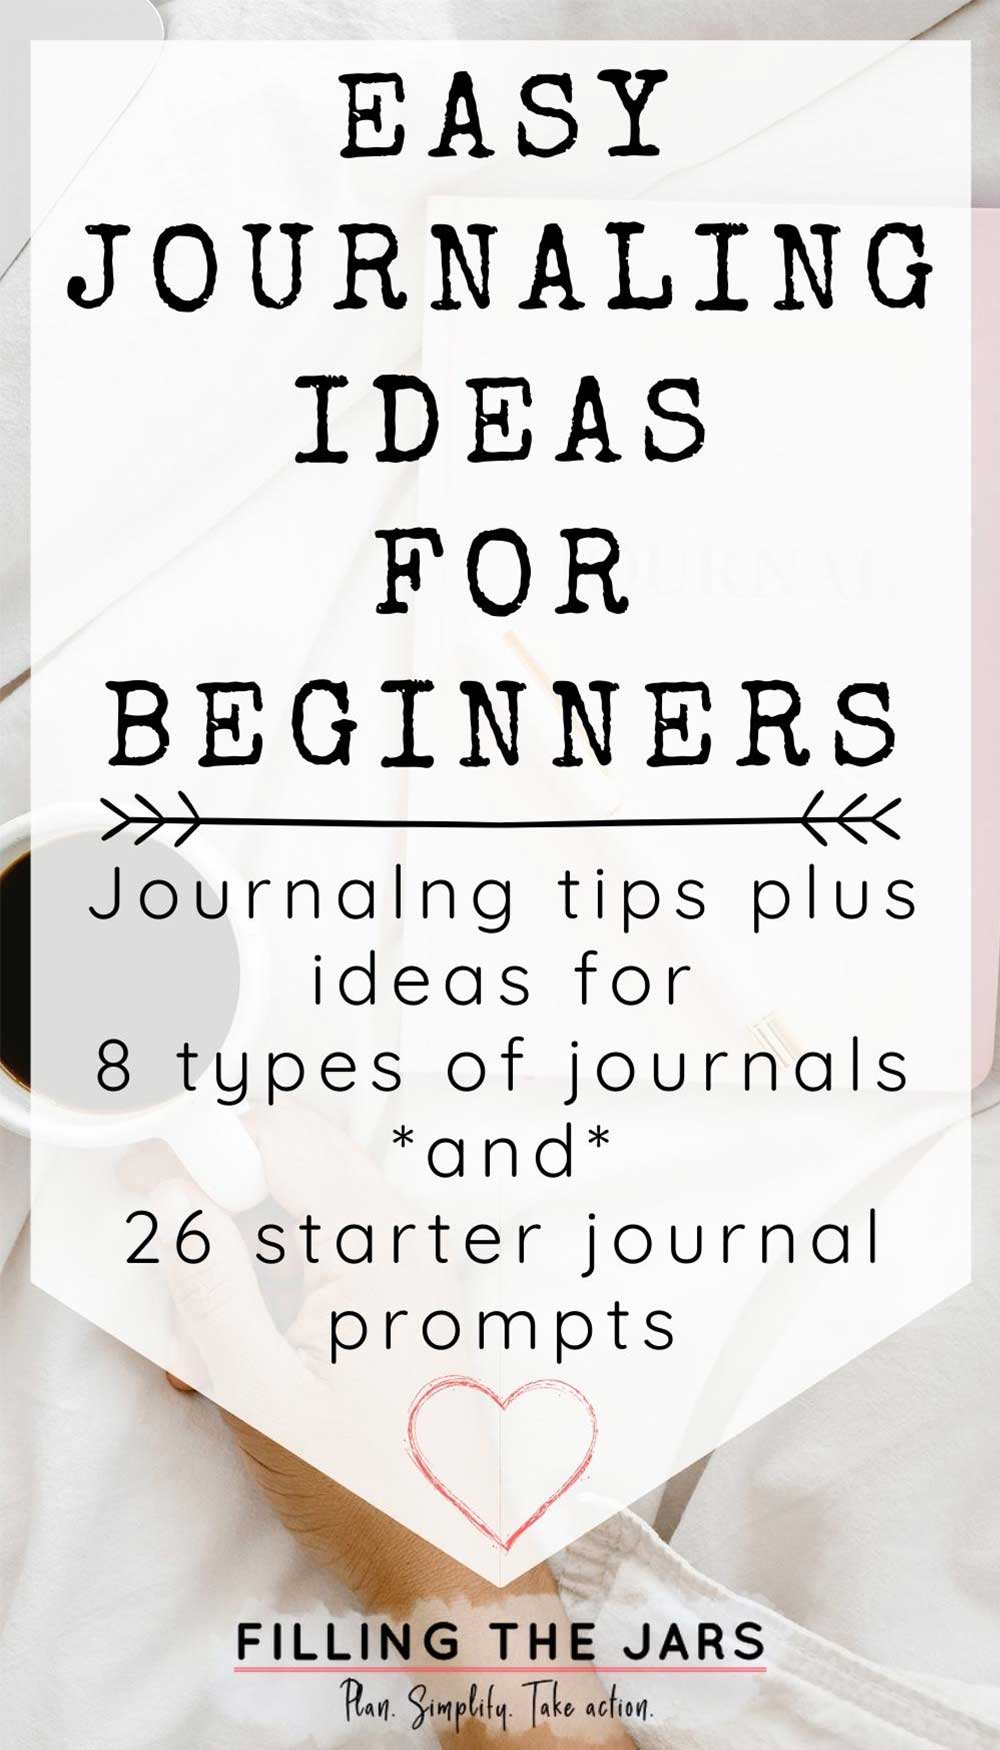 Text easy journaling ideas for beginners on white background over image of pink journal and pen next to female hand holding cup of coffee on white background.